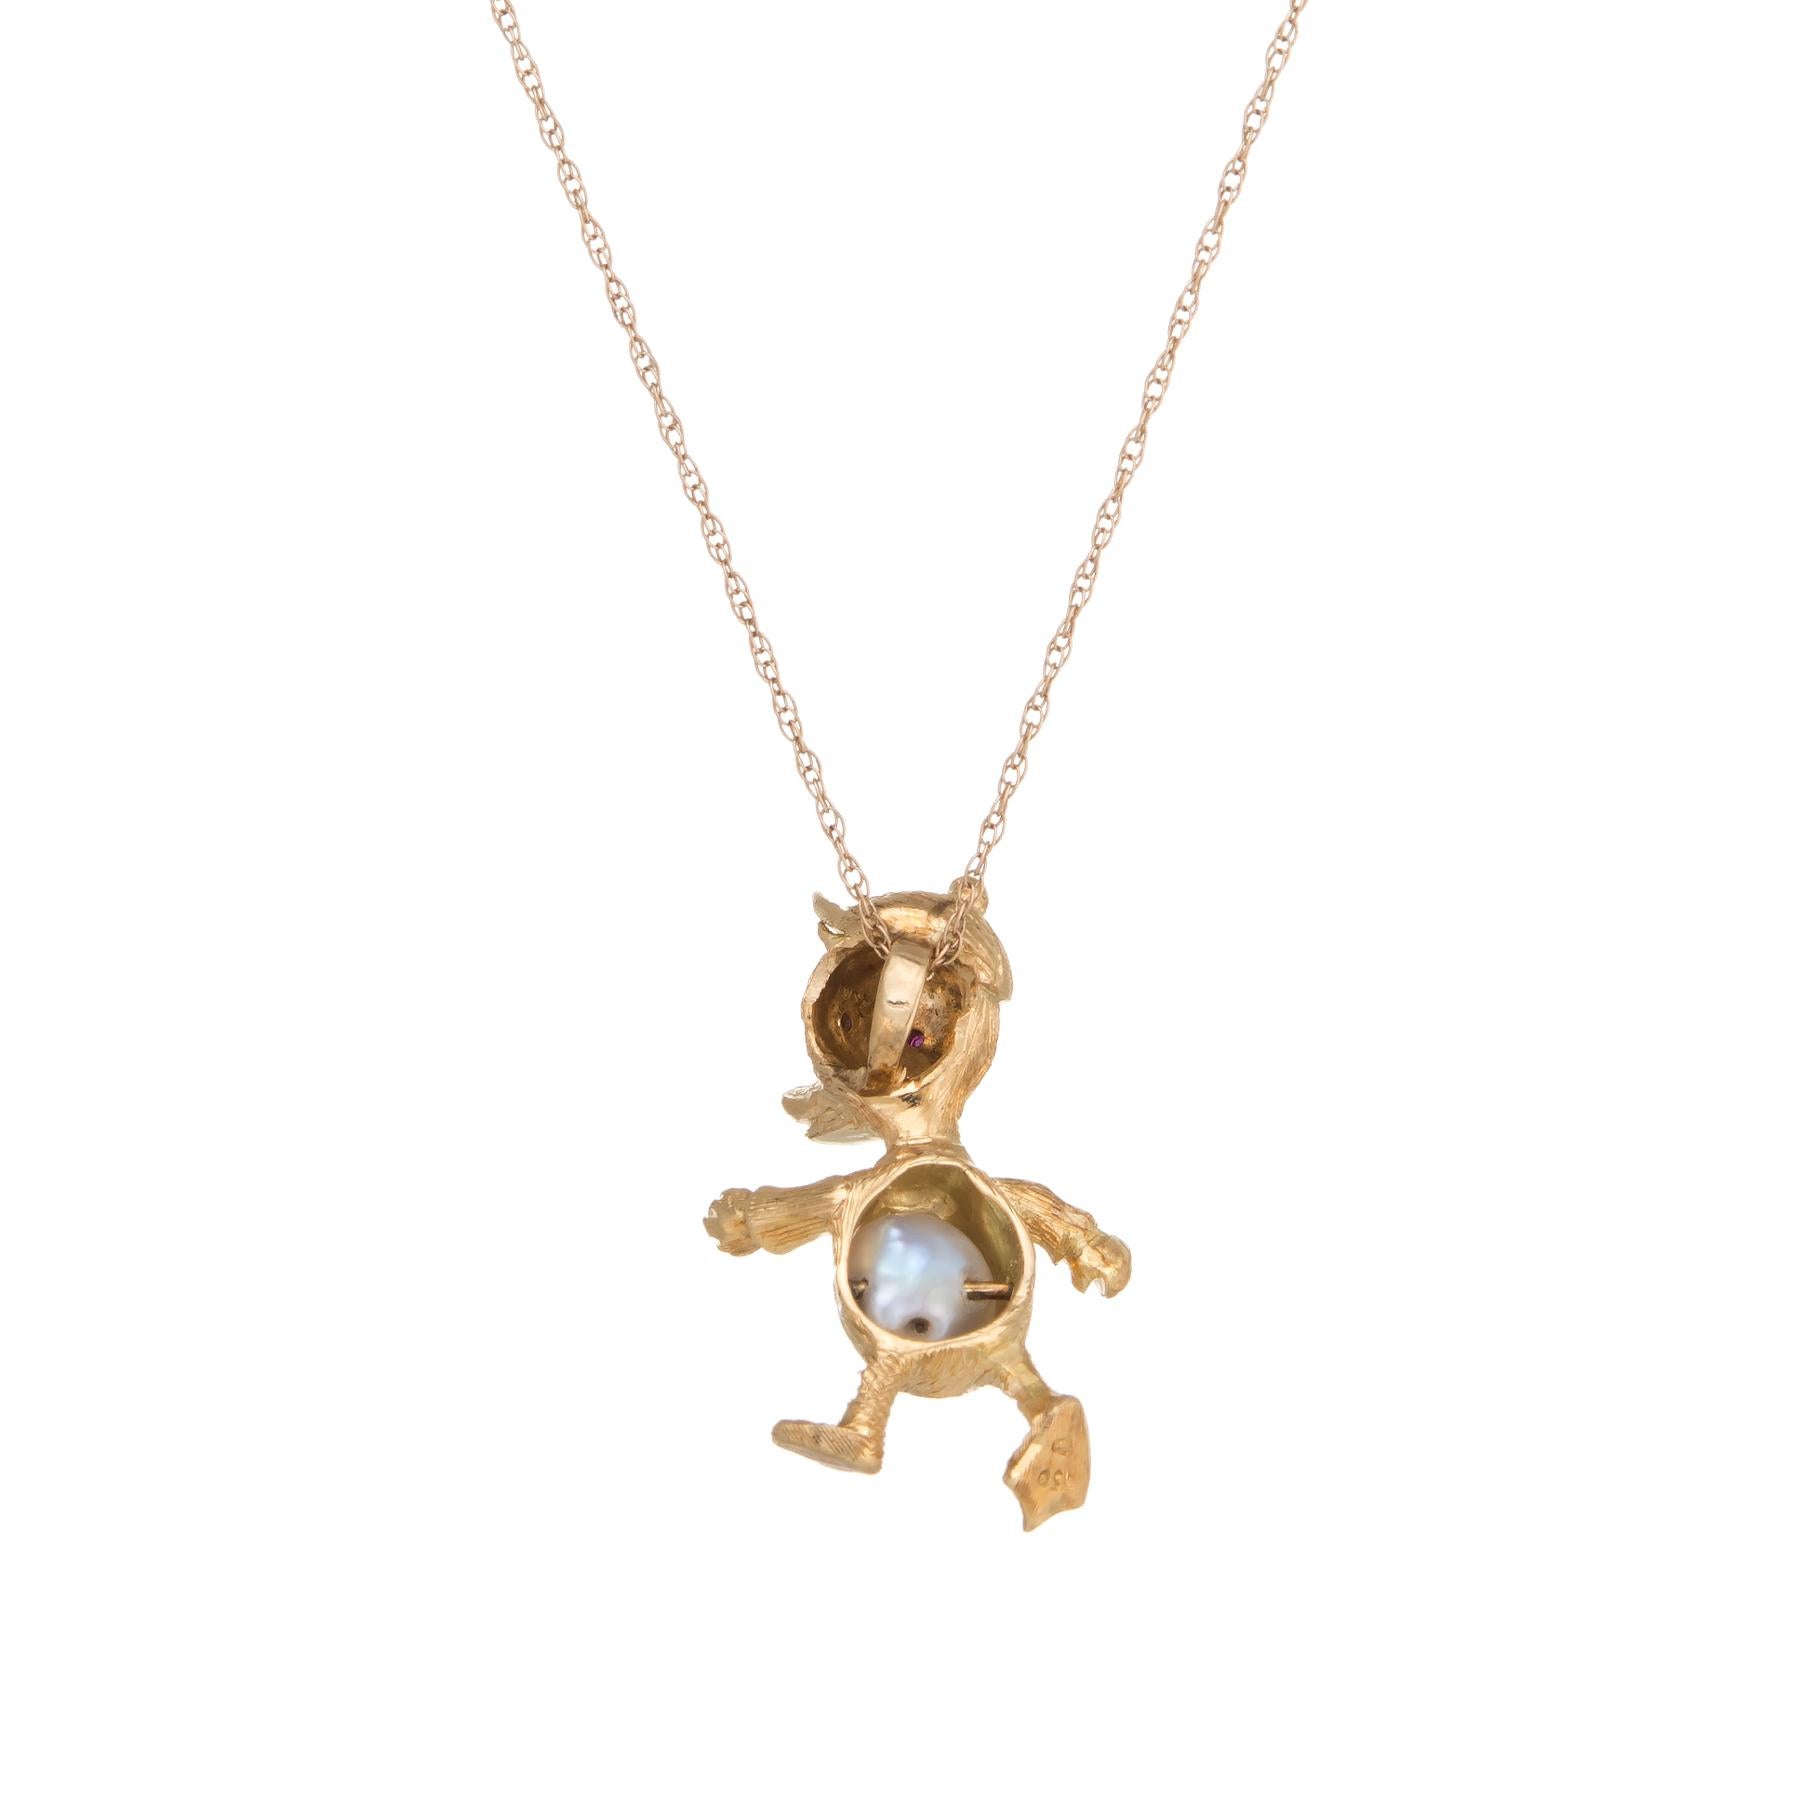 Finely detailed vintage duck pendant & necklace, crafted in 18 karat yellow gold (duck) and 14 karat yellow gold (necklace).  

A 6mm cultured pearl is set into the ducks belly. Two estimated 0.01 carat cabochon cut rubies are set into the eyes. 